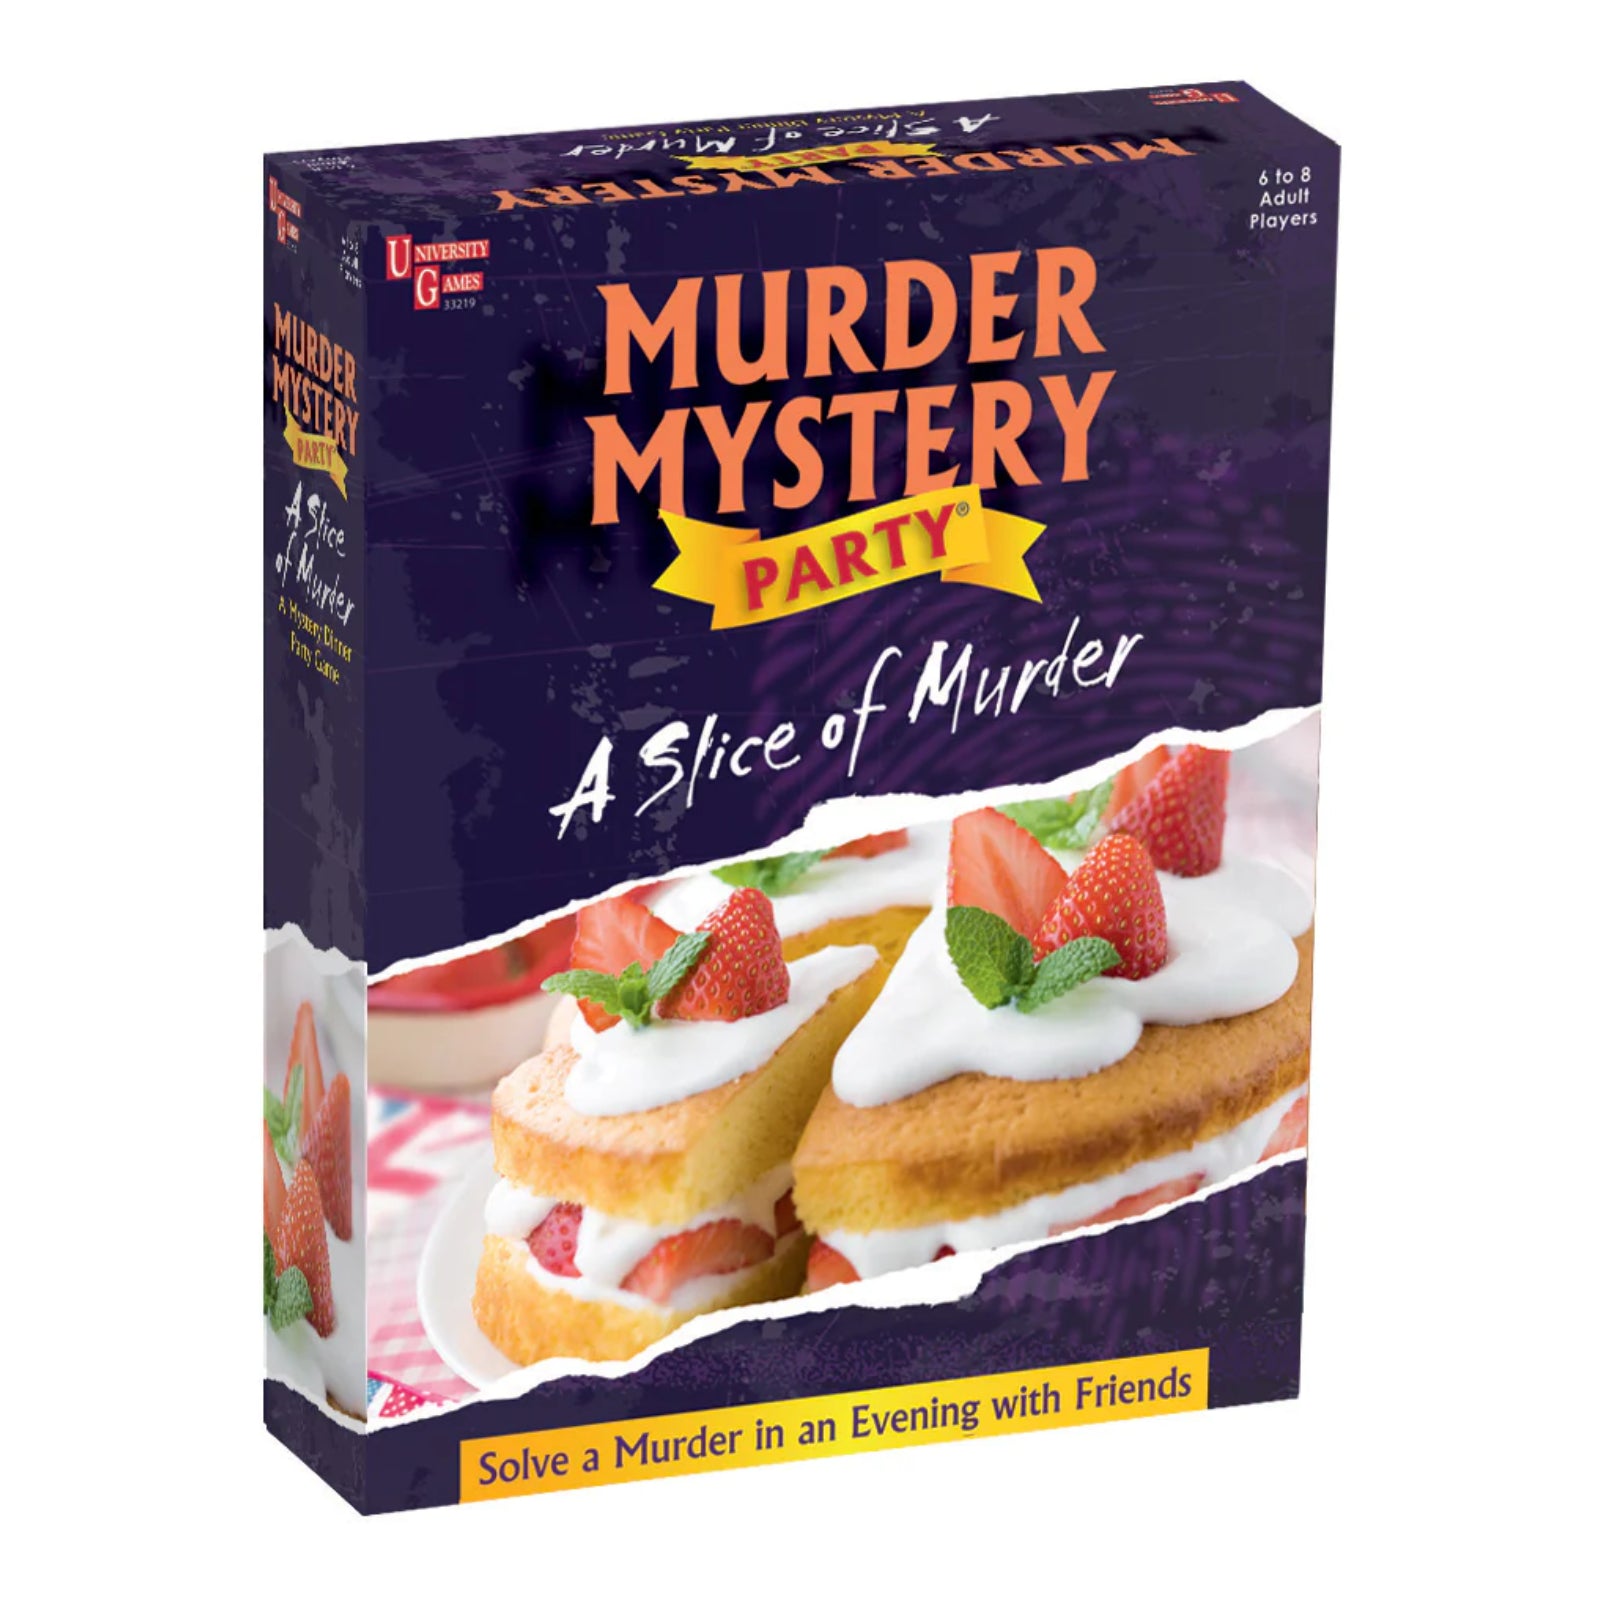 A Slice of Murder - Murder Mystery Party